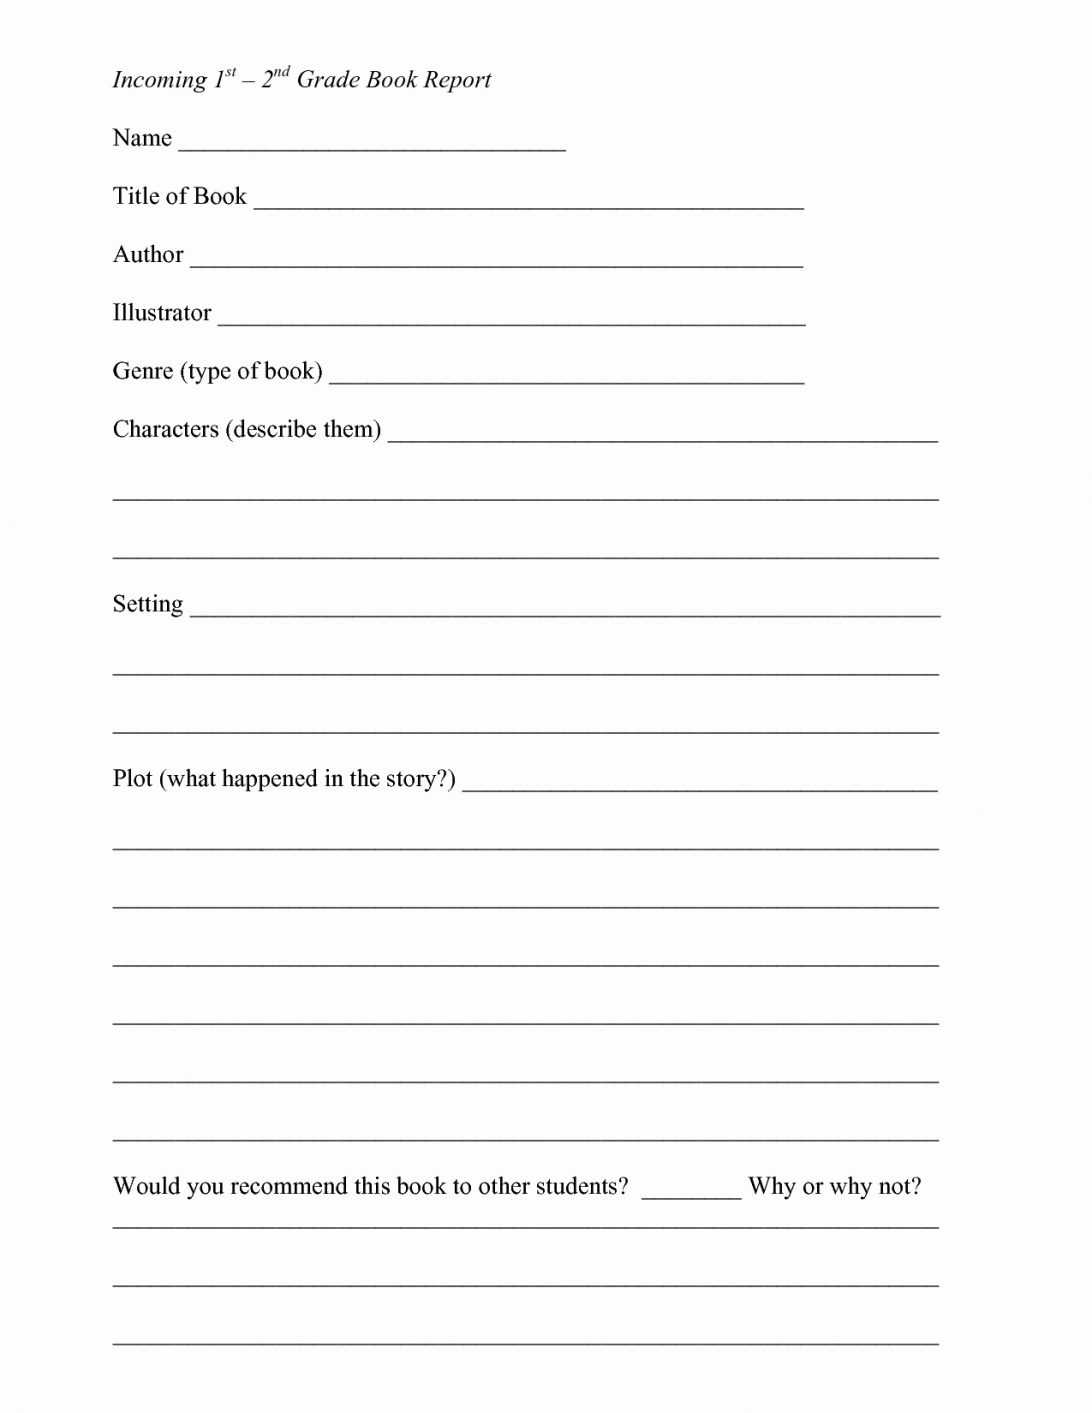 Fiction Book Report Template 6Th Grade For 7Th Graders Pdf With Biography Book Report Template